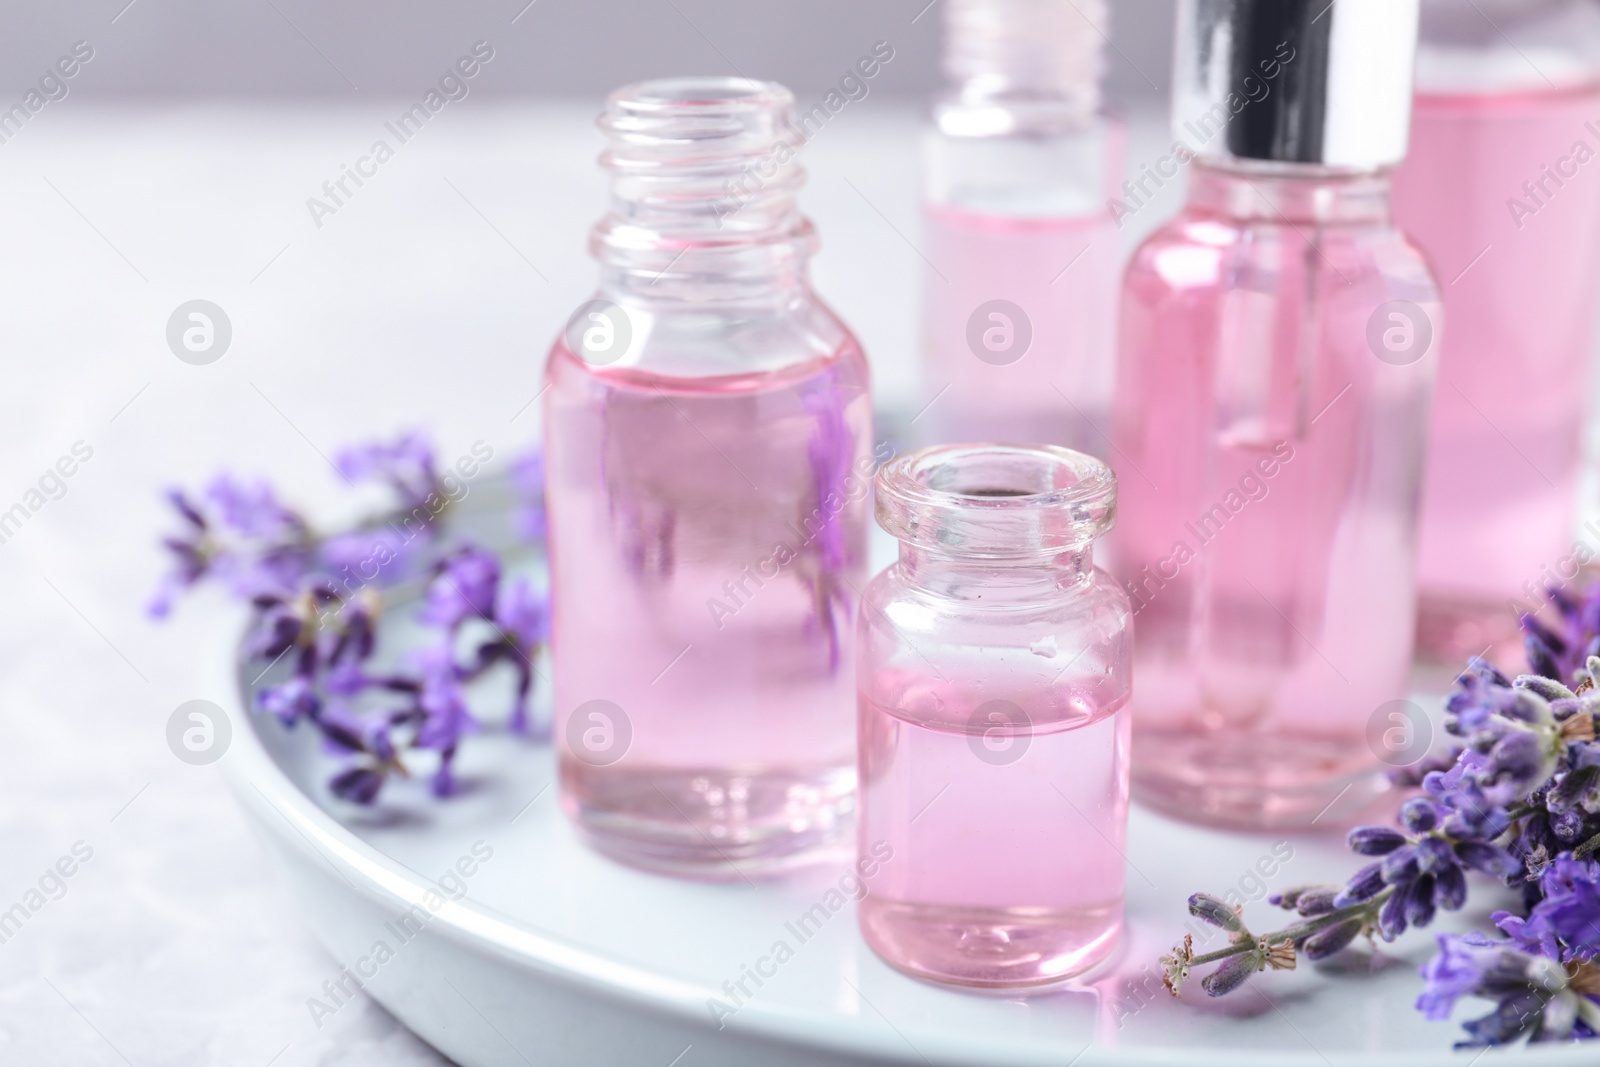 Photo of Tray with bottles of lavender essential oil and flowers on table